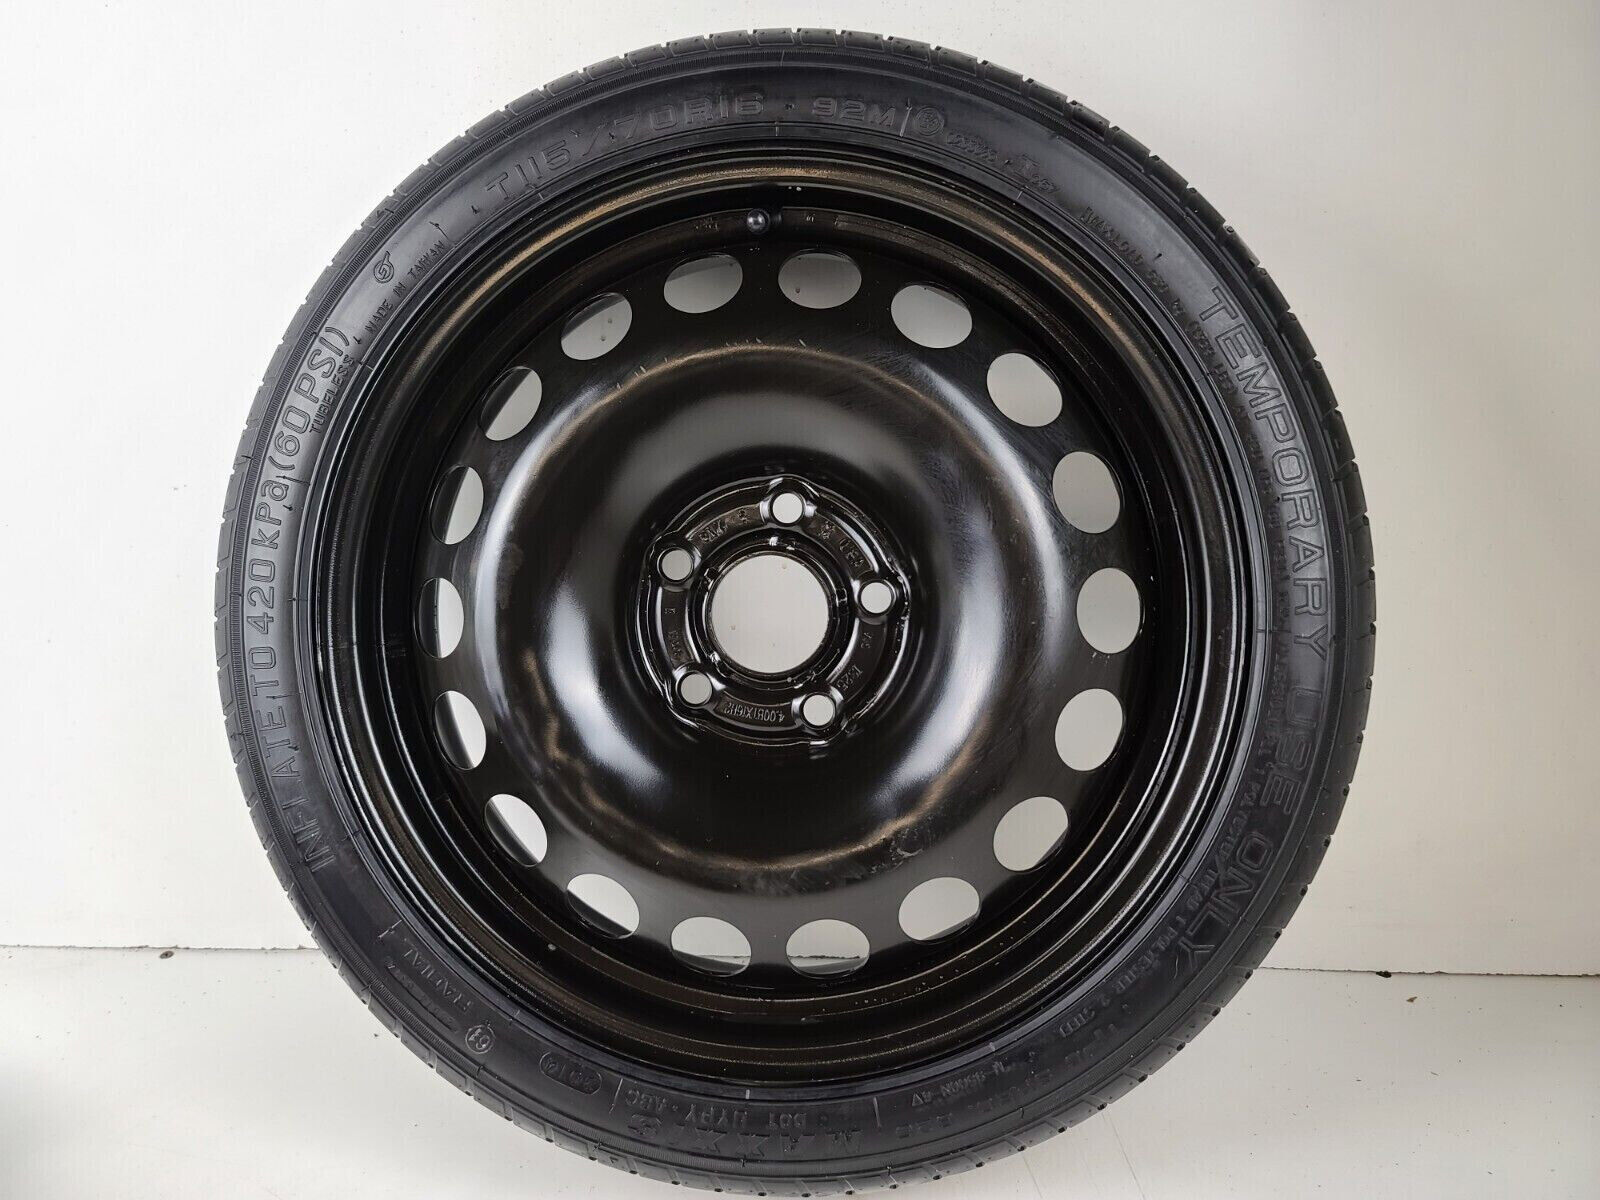 2011 -2019 CHEVY CRUZE SPARE TIRE DONUT  T115/70R16 OEM